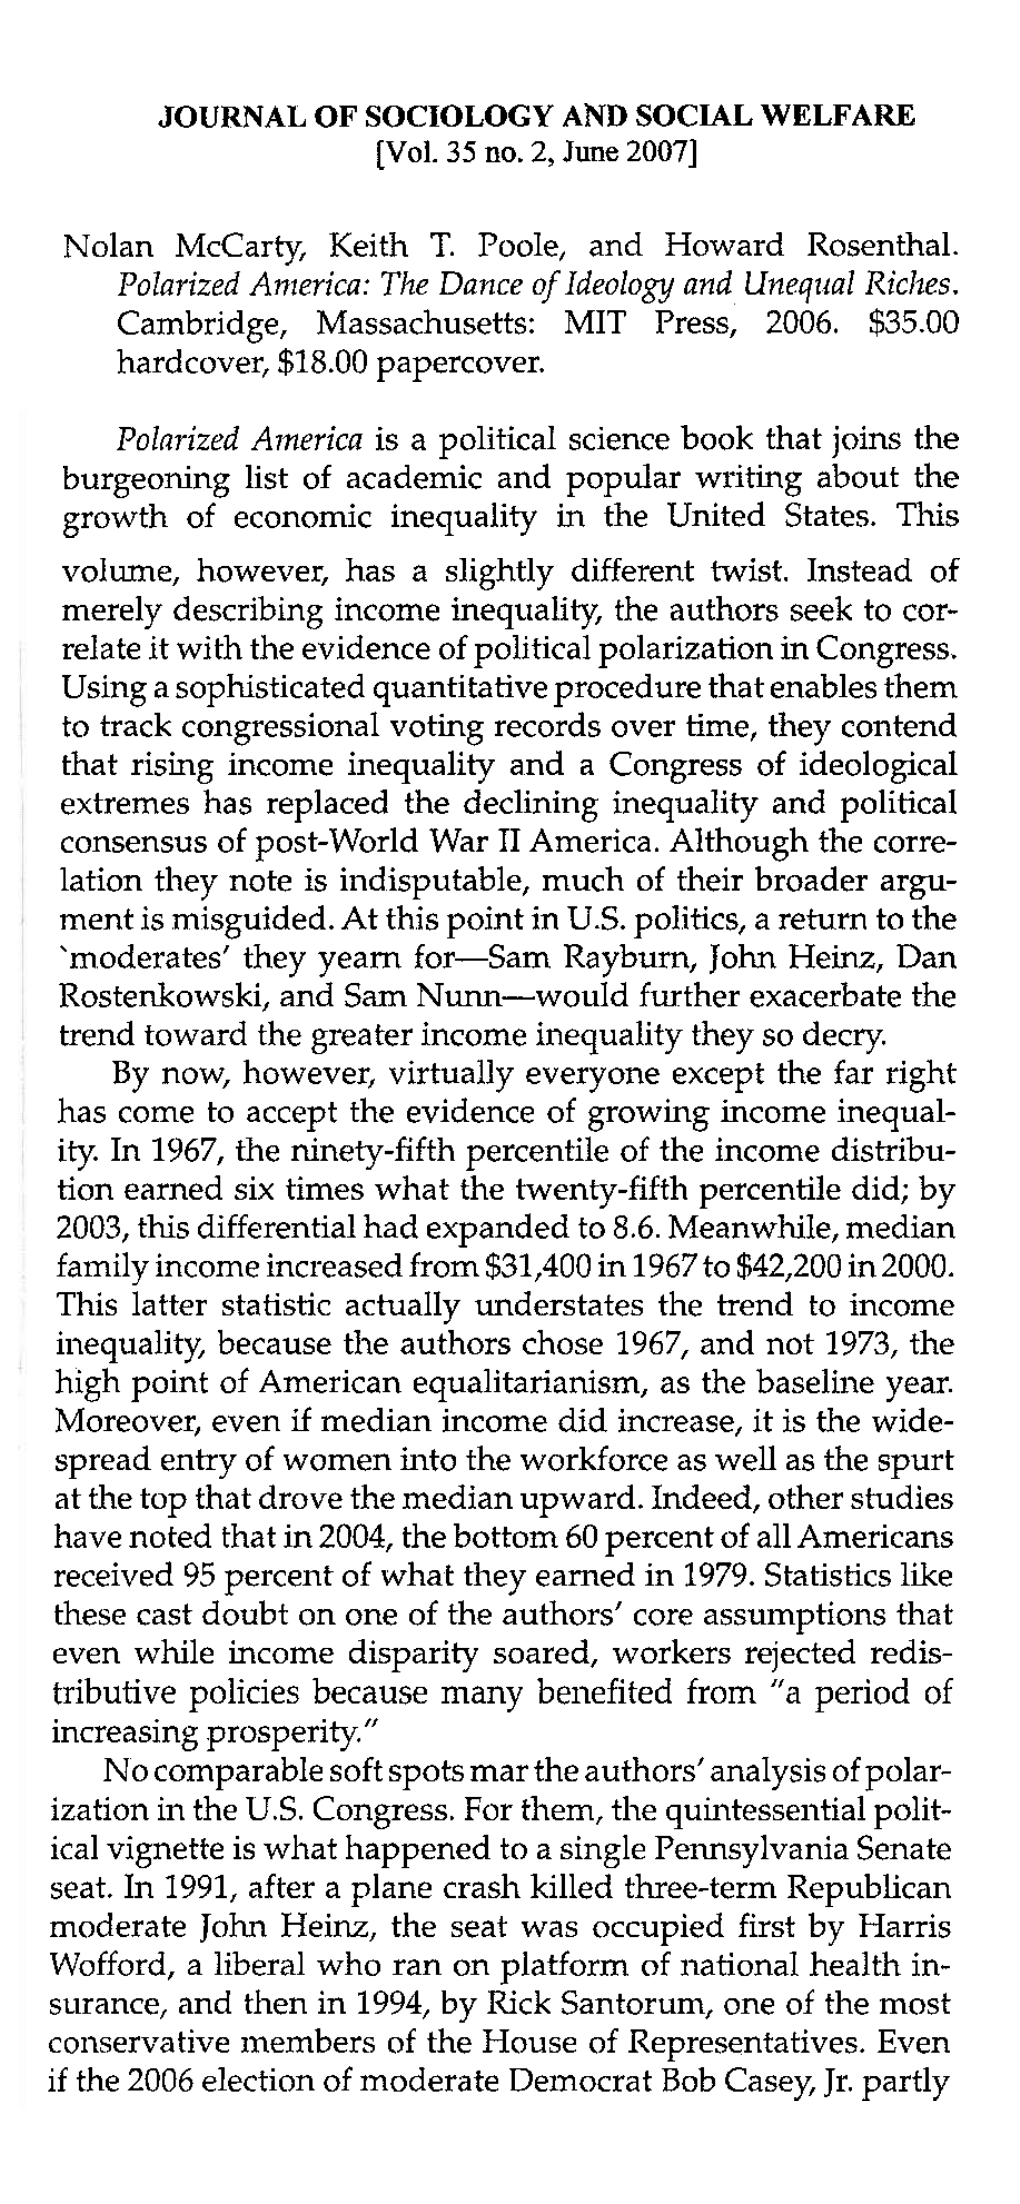 Nolan Mccarty, Keith T. Poole, and Howard Rosenthal. Polarized America: the Dance of Ideology and Uneqtral Riches